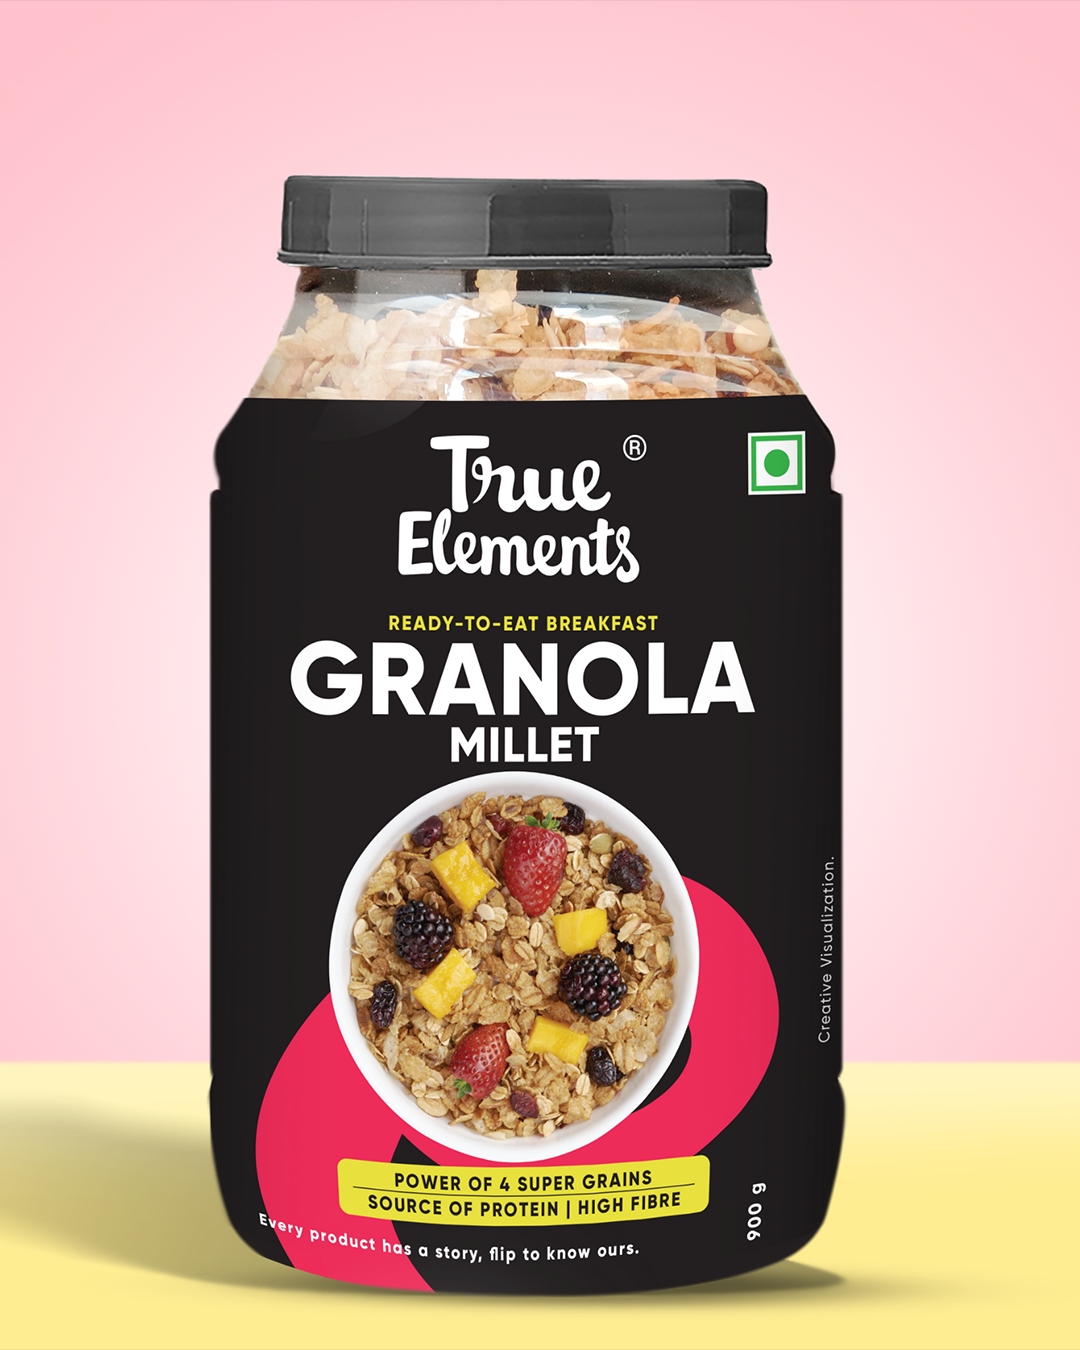 True Elements Millet Granola with Almonds and Cranberries